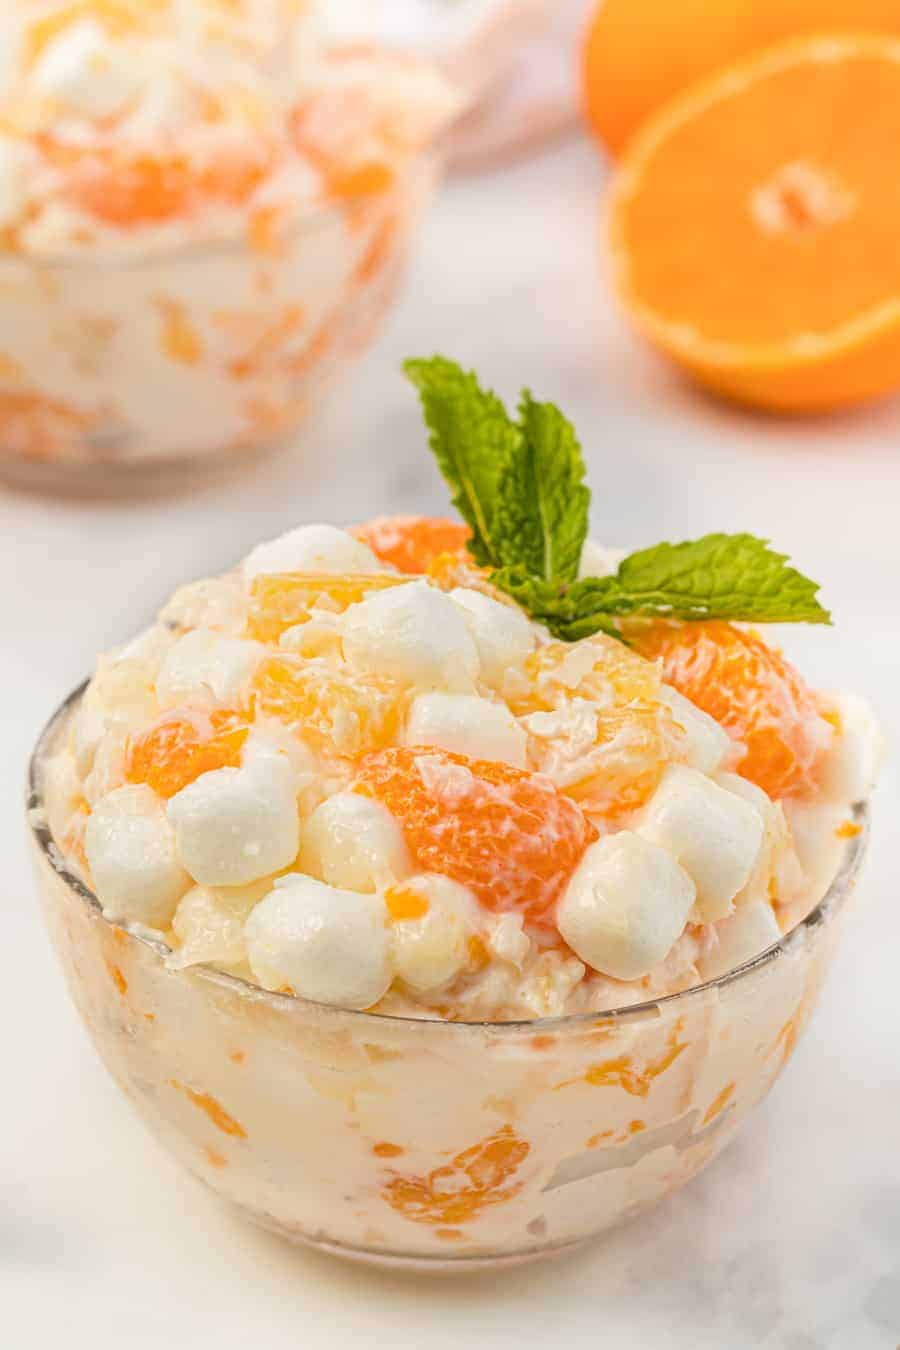 This tasty and creamy 6-cup ambrosia fruit salad is the simplest thing to make and is forever a hit for kiddos and adults alike at any gathering! #ambrosiafruitsalad #fruitsalad #fruit #fruitrecipes #salad #southerndishes #fruitsaladrecipe